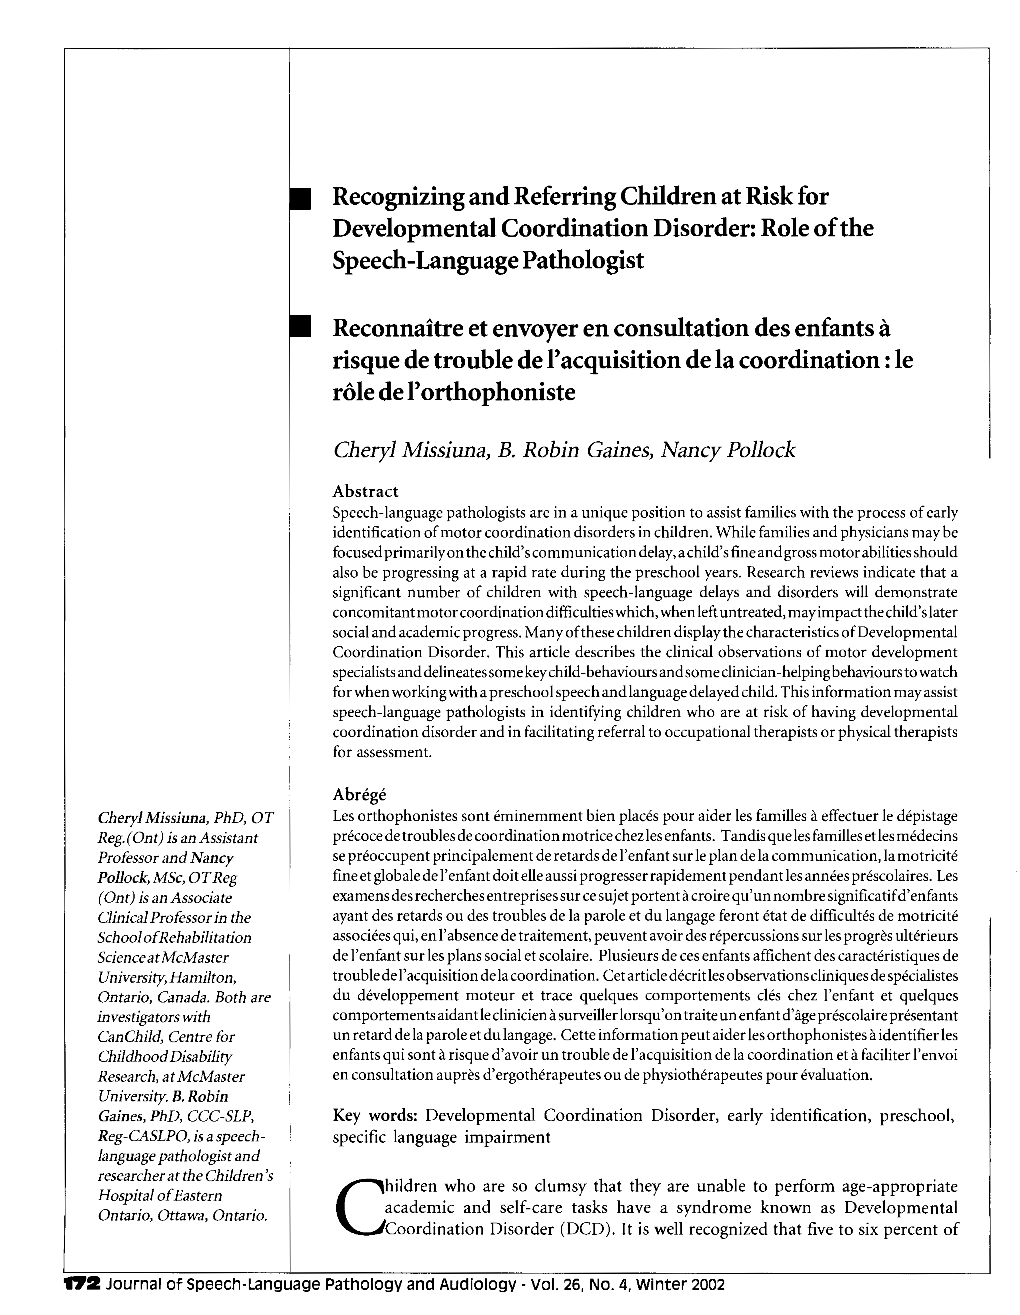 Recognizing and Referring Children at Risk for Developmental Coordination Disorder: Role of the Speech-Language Pathologist